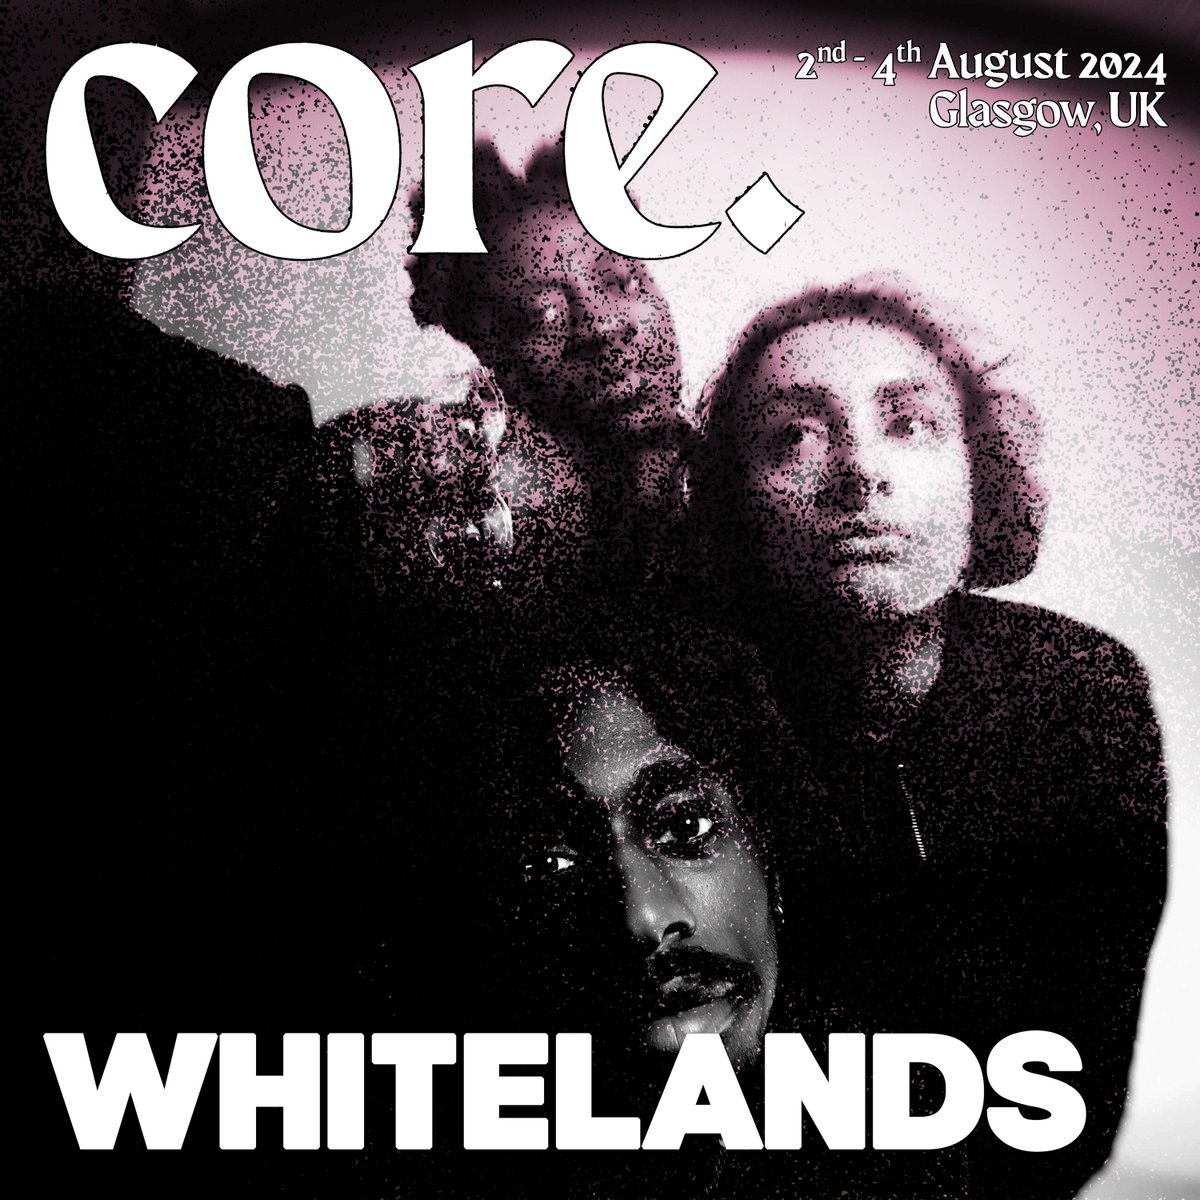 Some new festival dates for @whitelandsband 👇 Sunday, May 26 – Cardiff Psych & Noise Fest at @TheMoonCardiff Friday, August 2 – Glasgow Core. Festival Tickets for all forthcoming shows are here: linktr.ee/whitelands2024